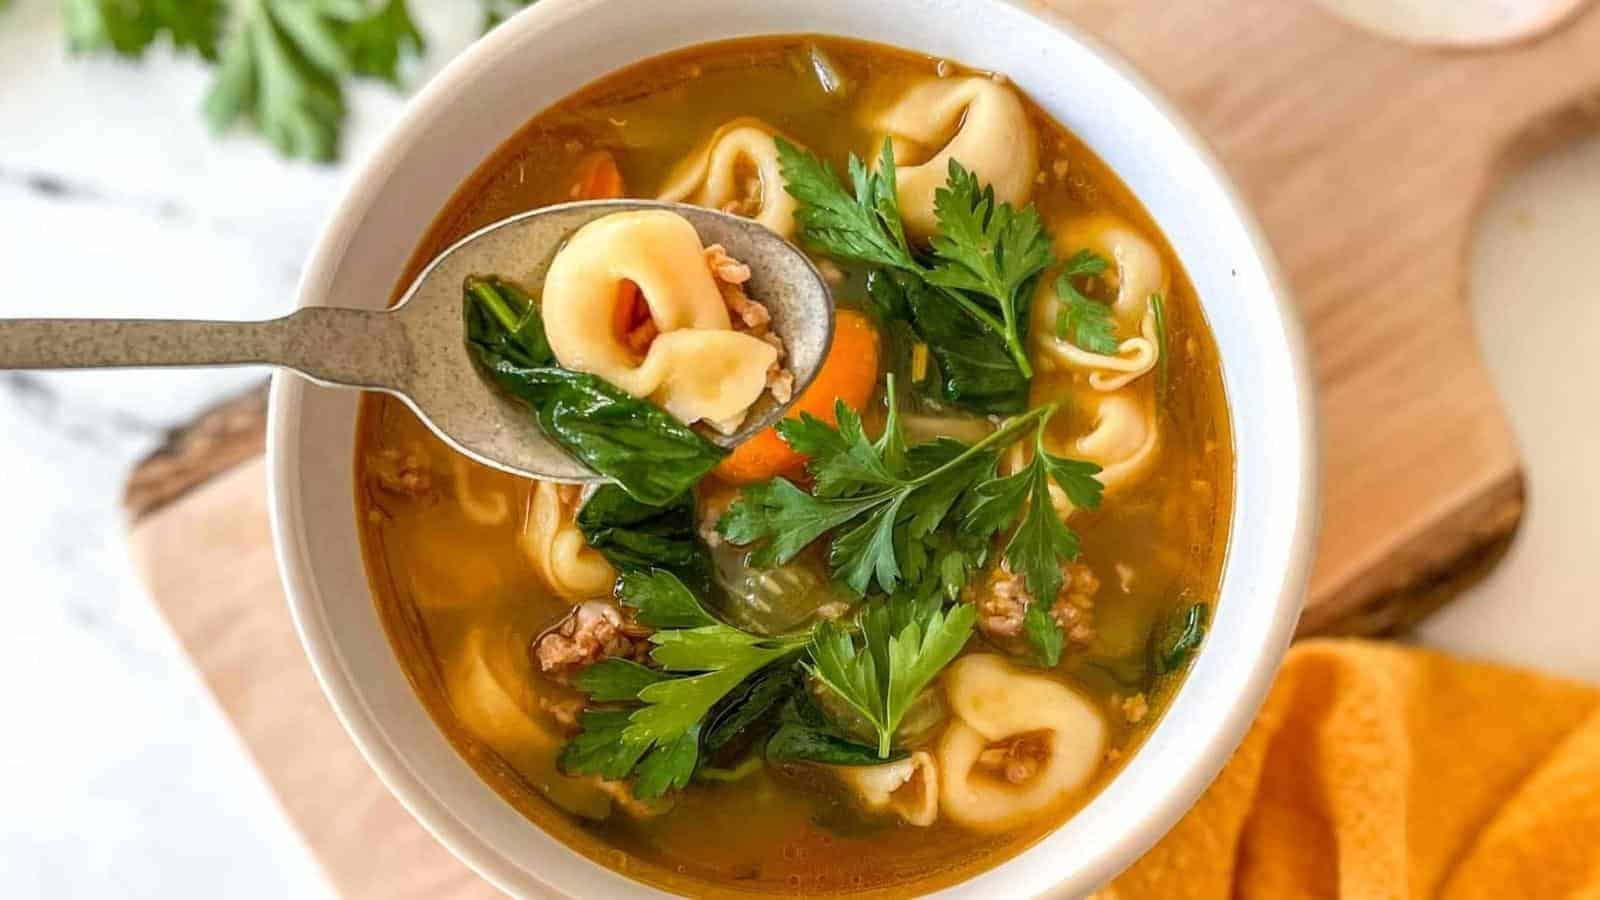 A bowl of tortellini soup sits on a rustic wooden cutting board with a yellow linen and a bunch of parsley.